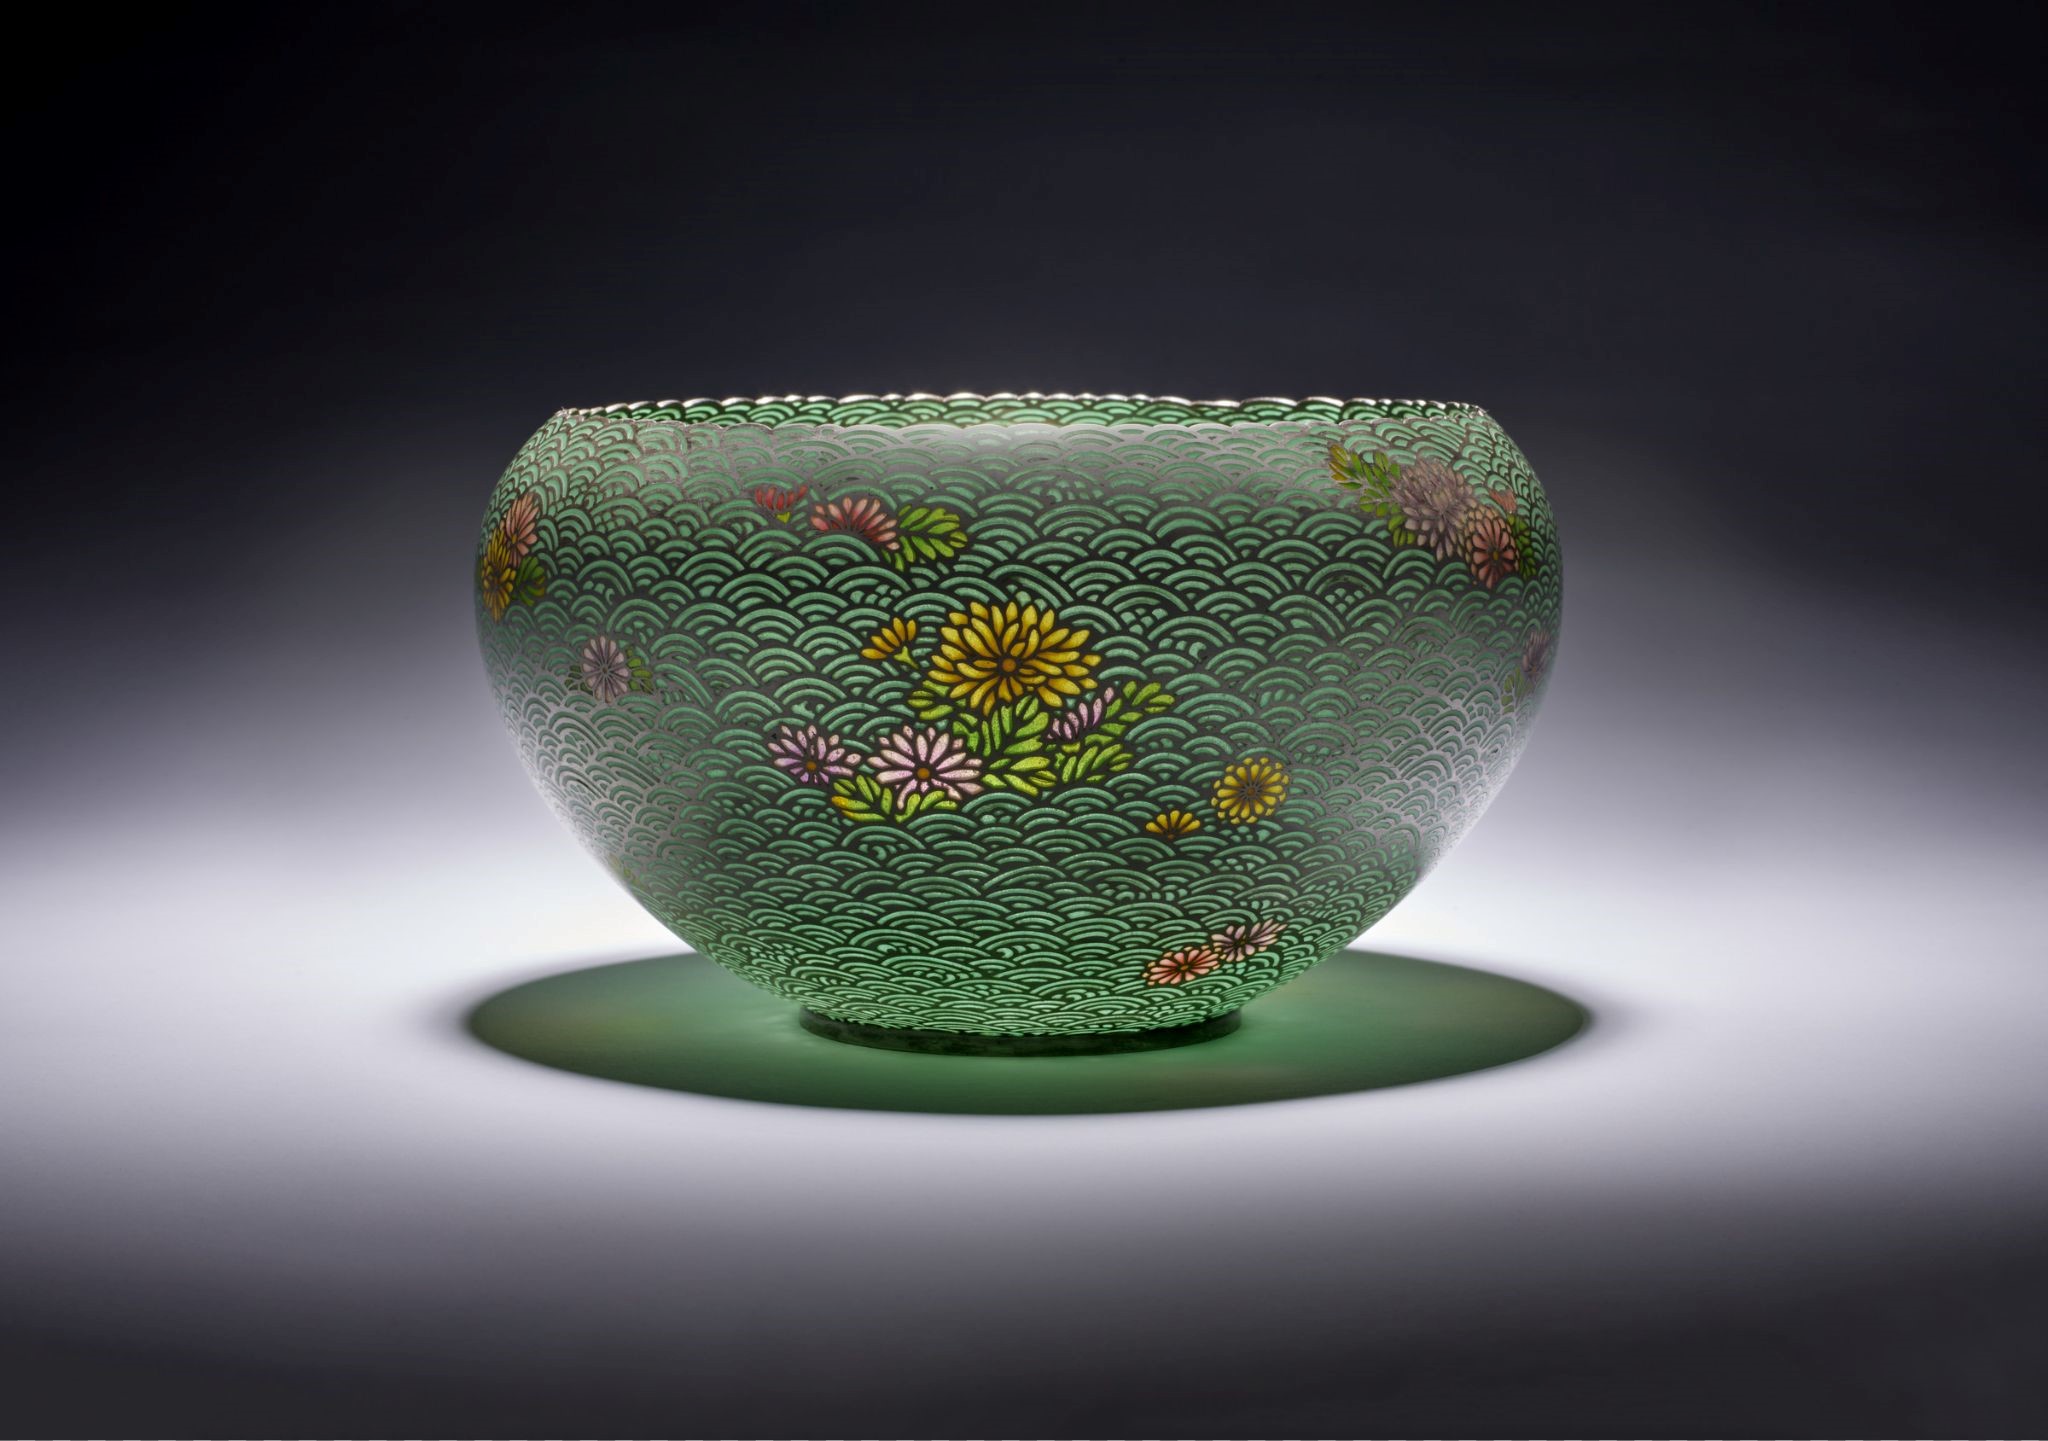 a green porcelain bowl with delicate spirals and yellow flowers